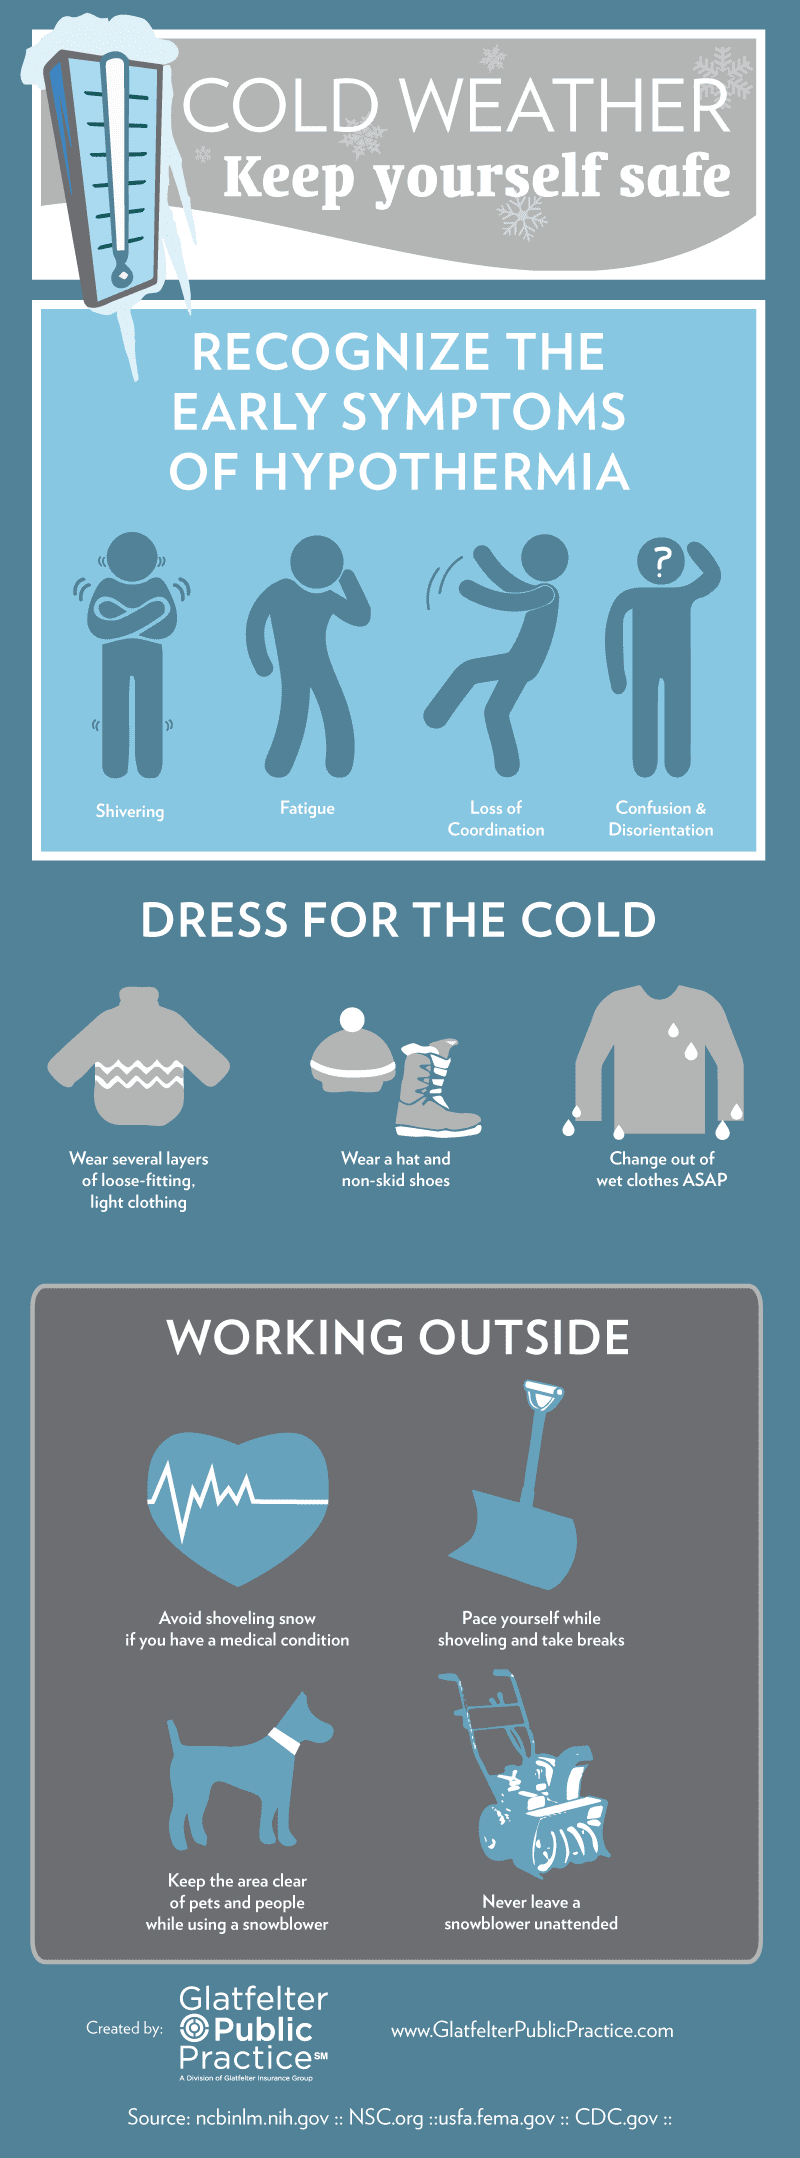 Cold-Weather-Safety_GPP